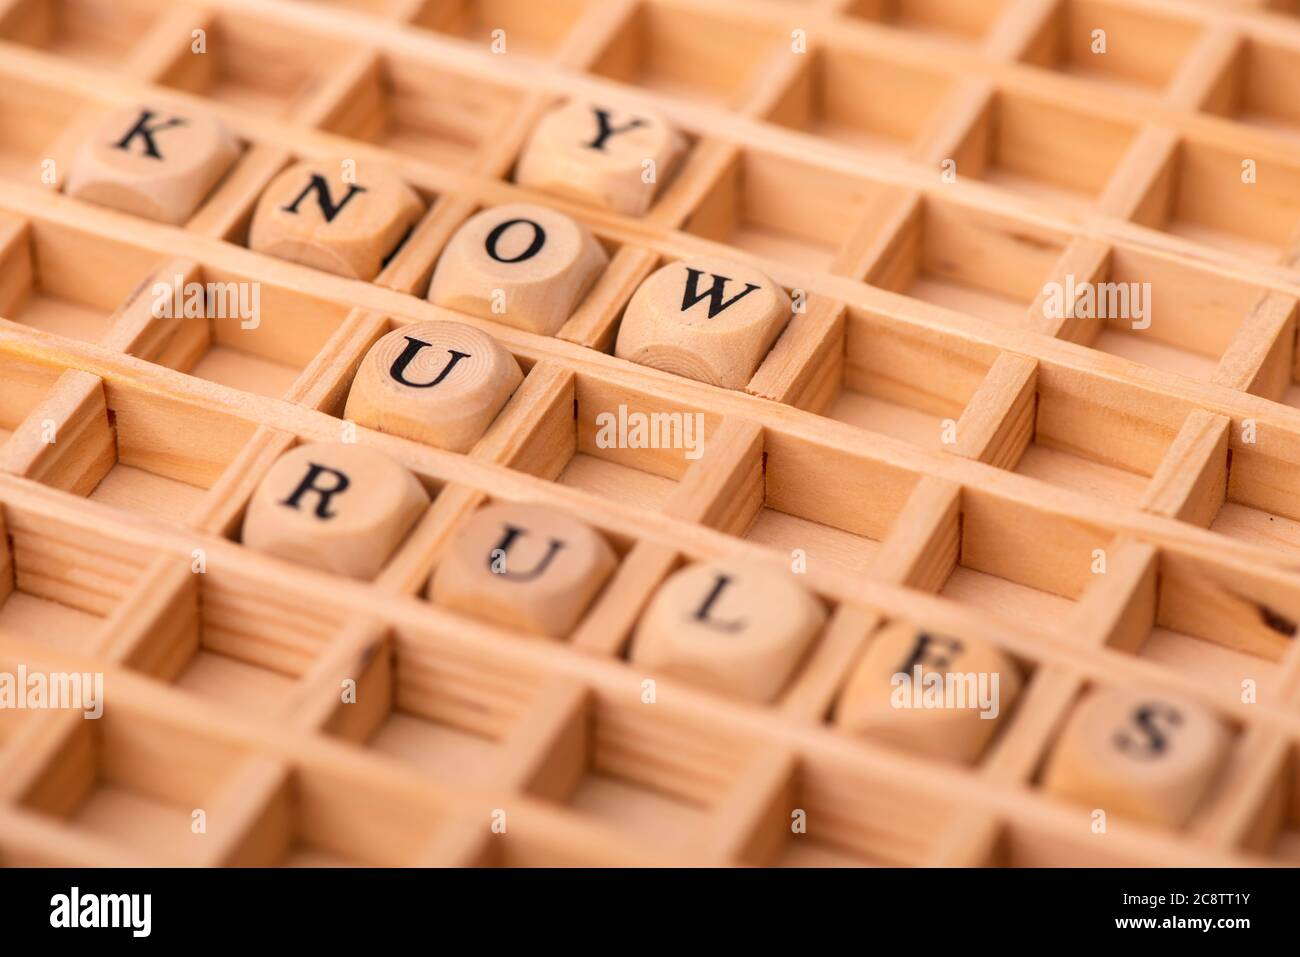 word cloud for know your rules Stock Photo